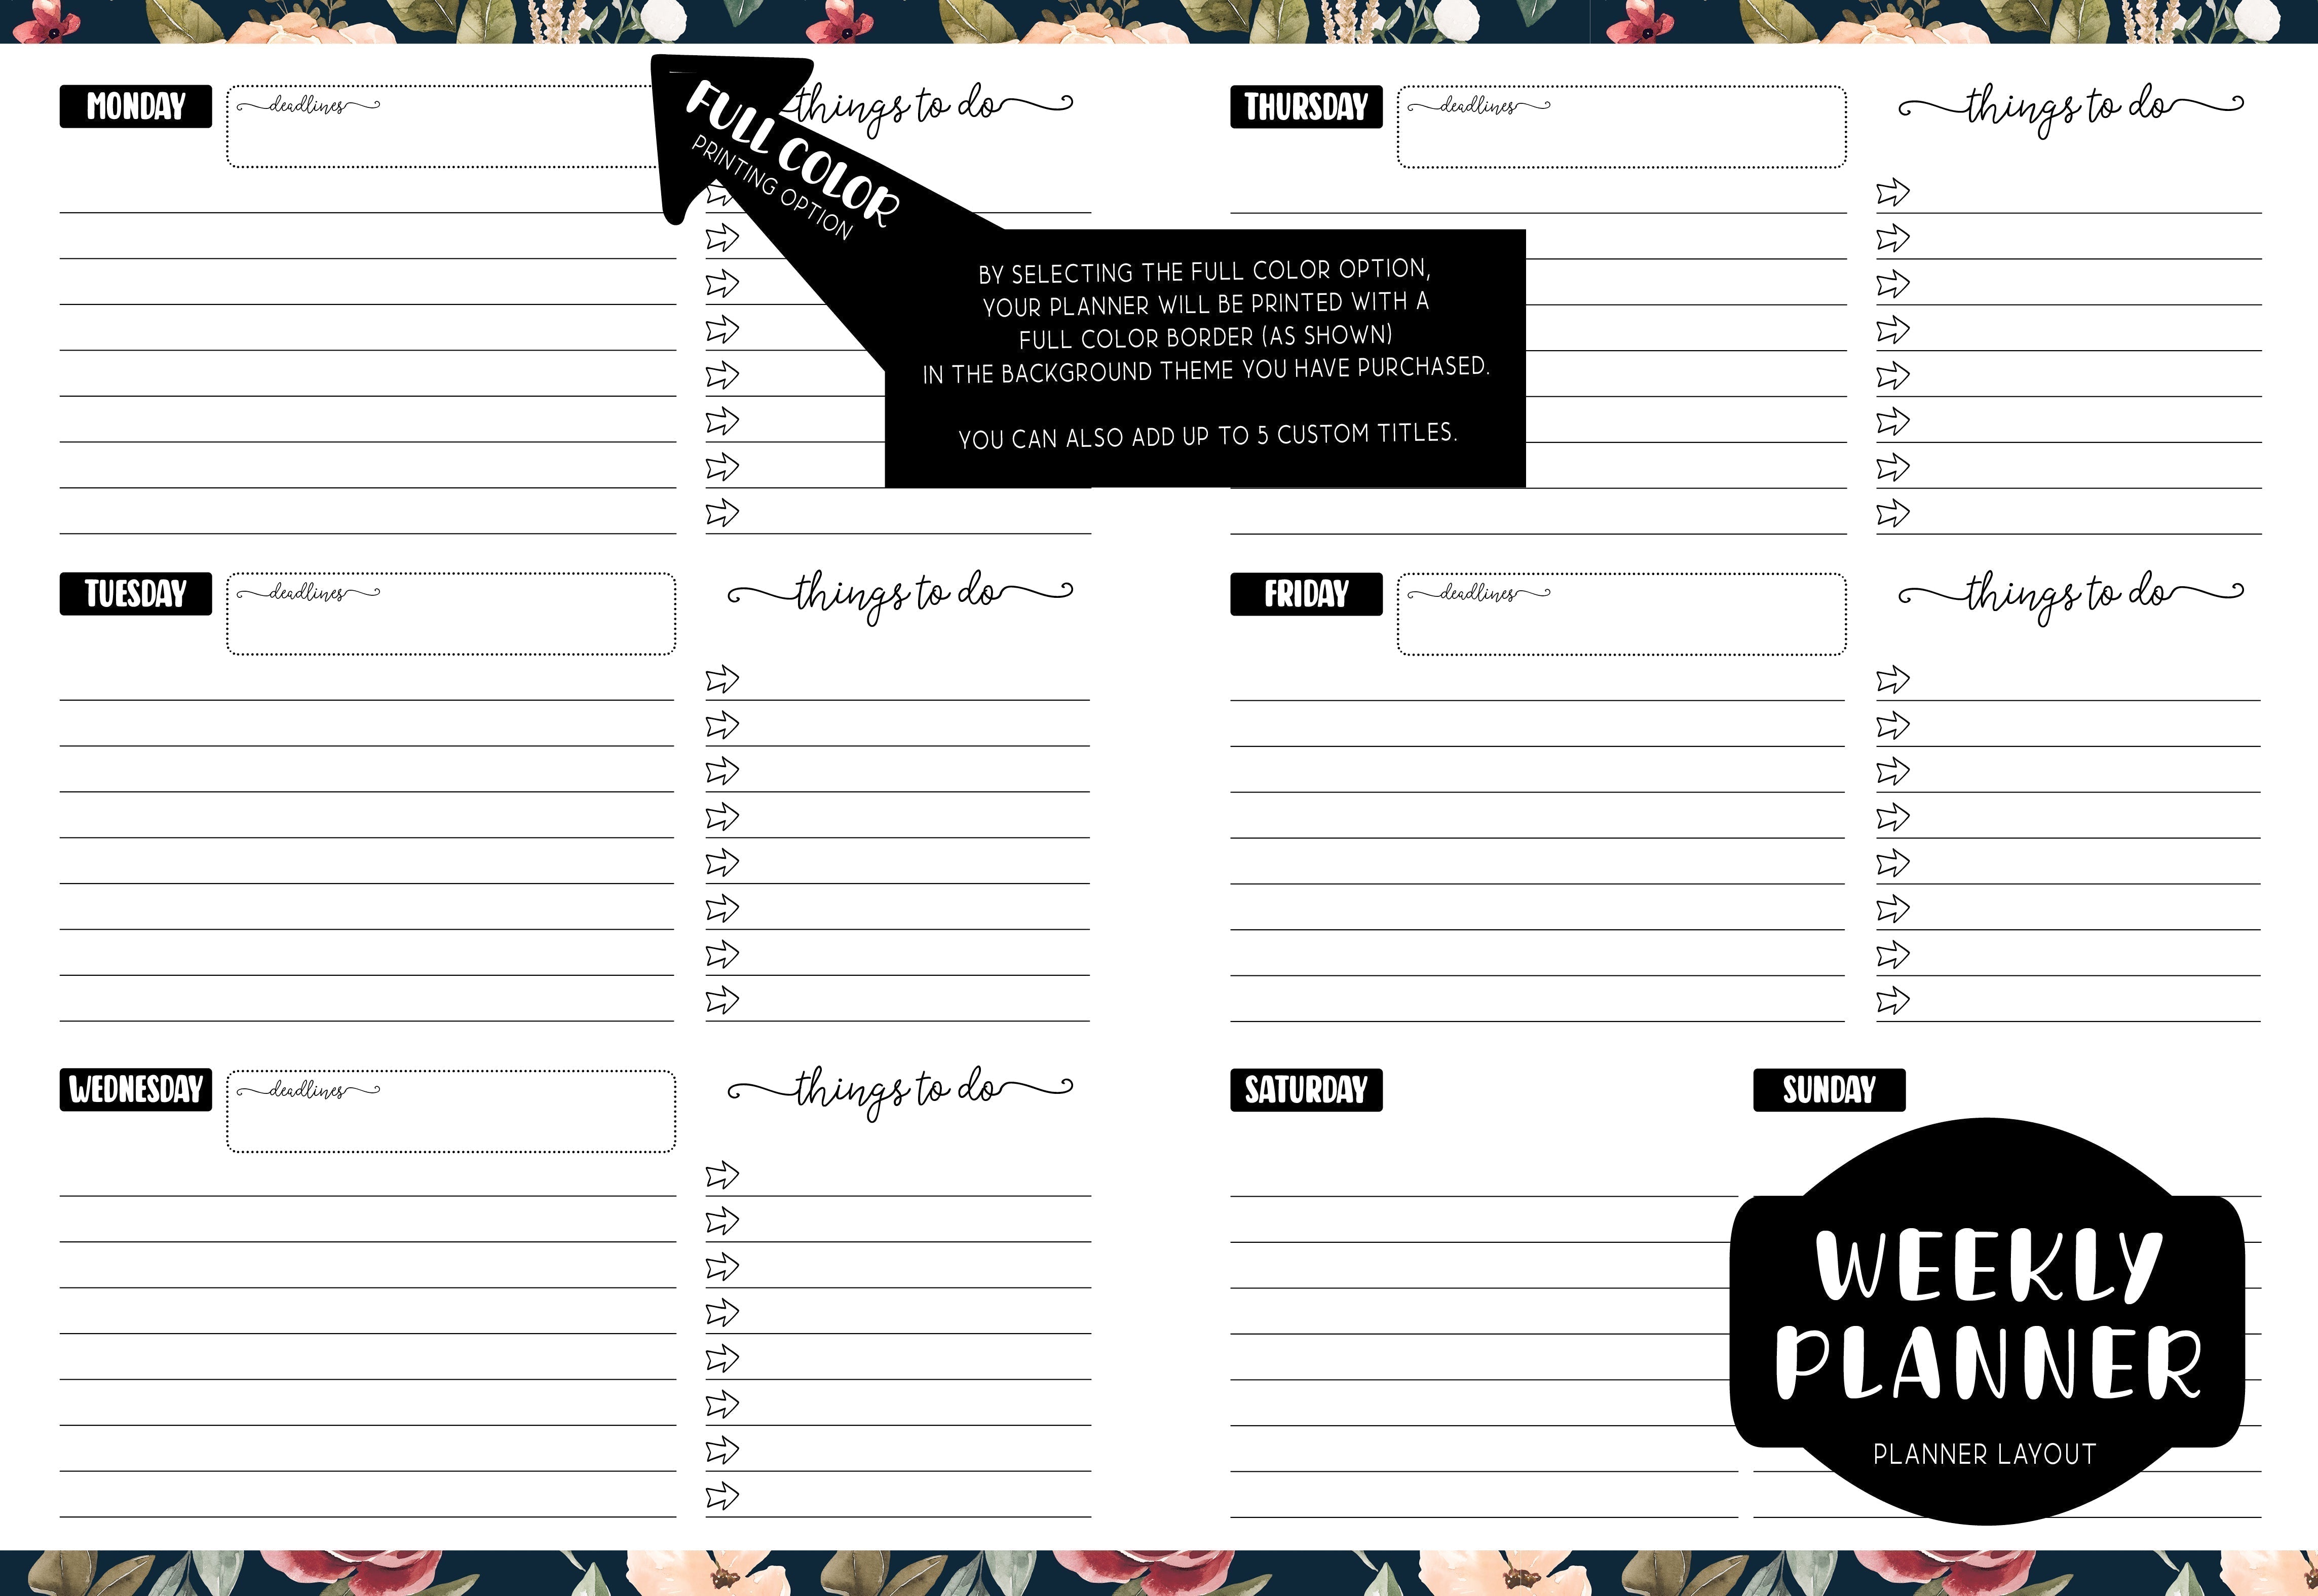 Weekly Planner - ROSE GOLD GREY LEOPARD